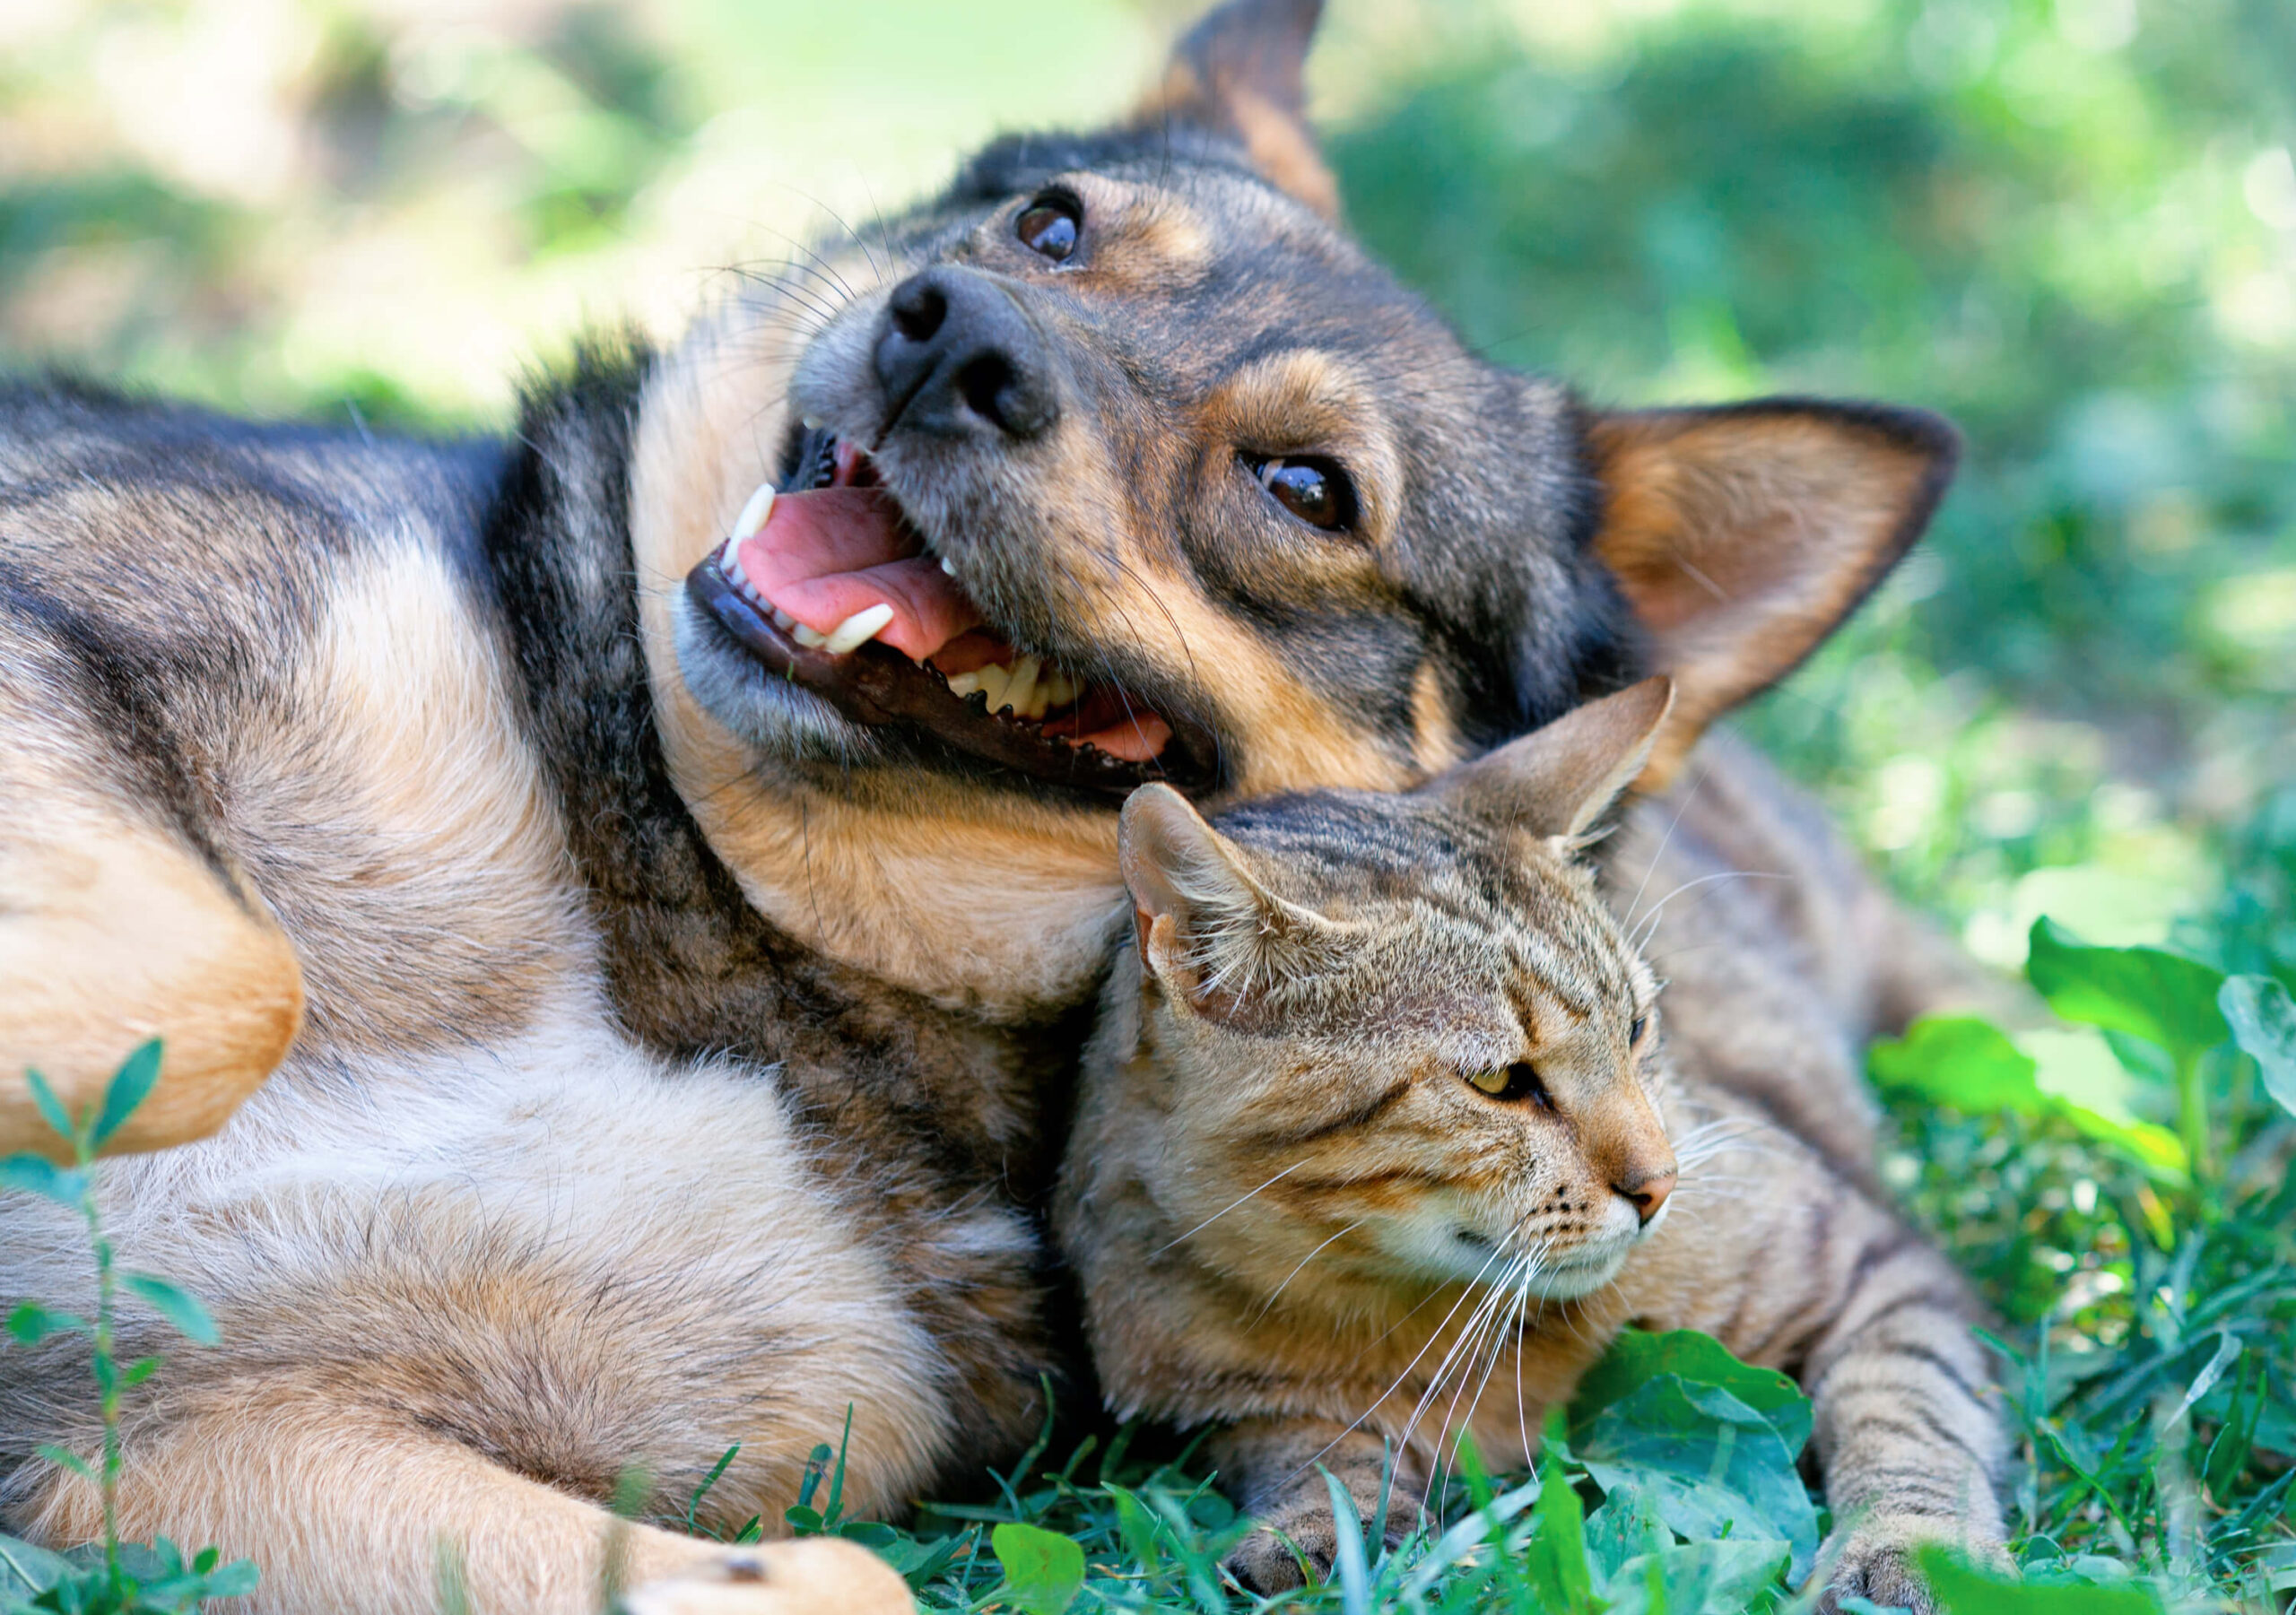 A dog and a cat lying together